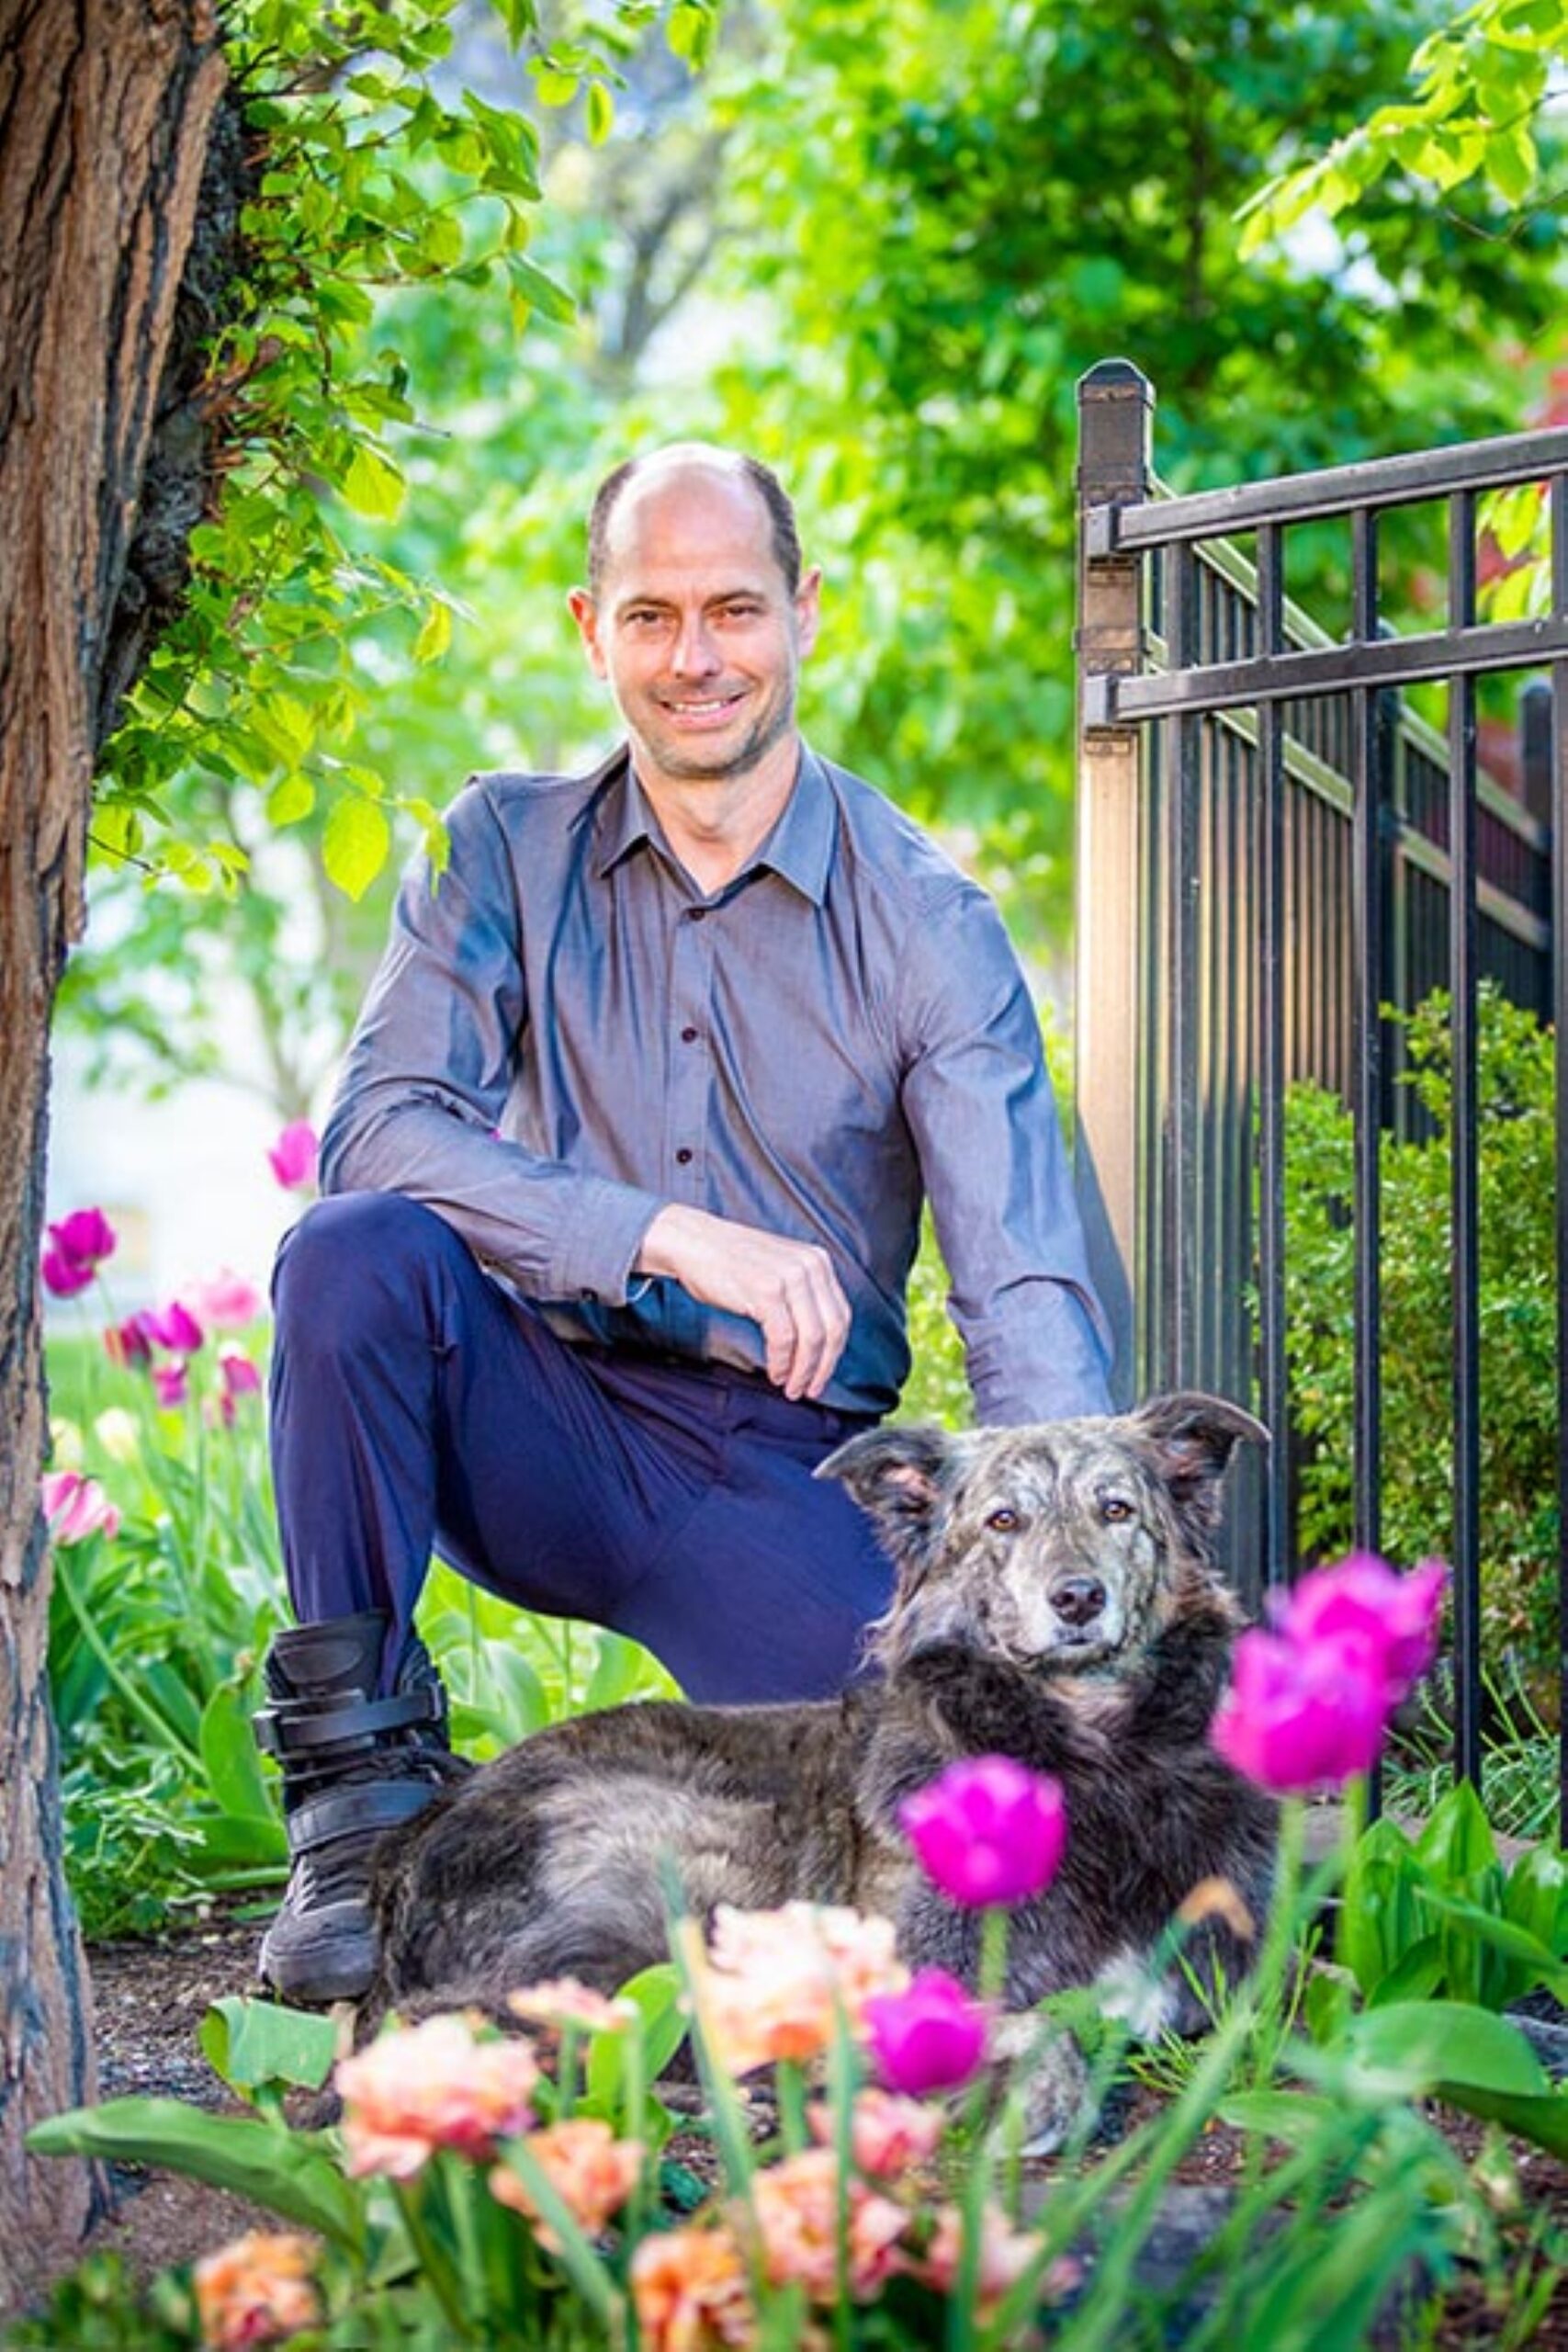 Molly and Toby, candidates for mayor of Toronto, pose for a picture in a garden